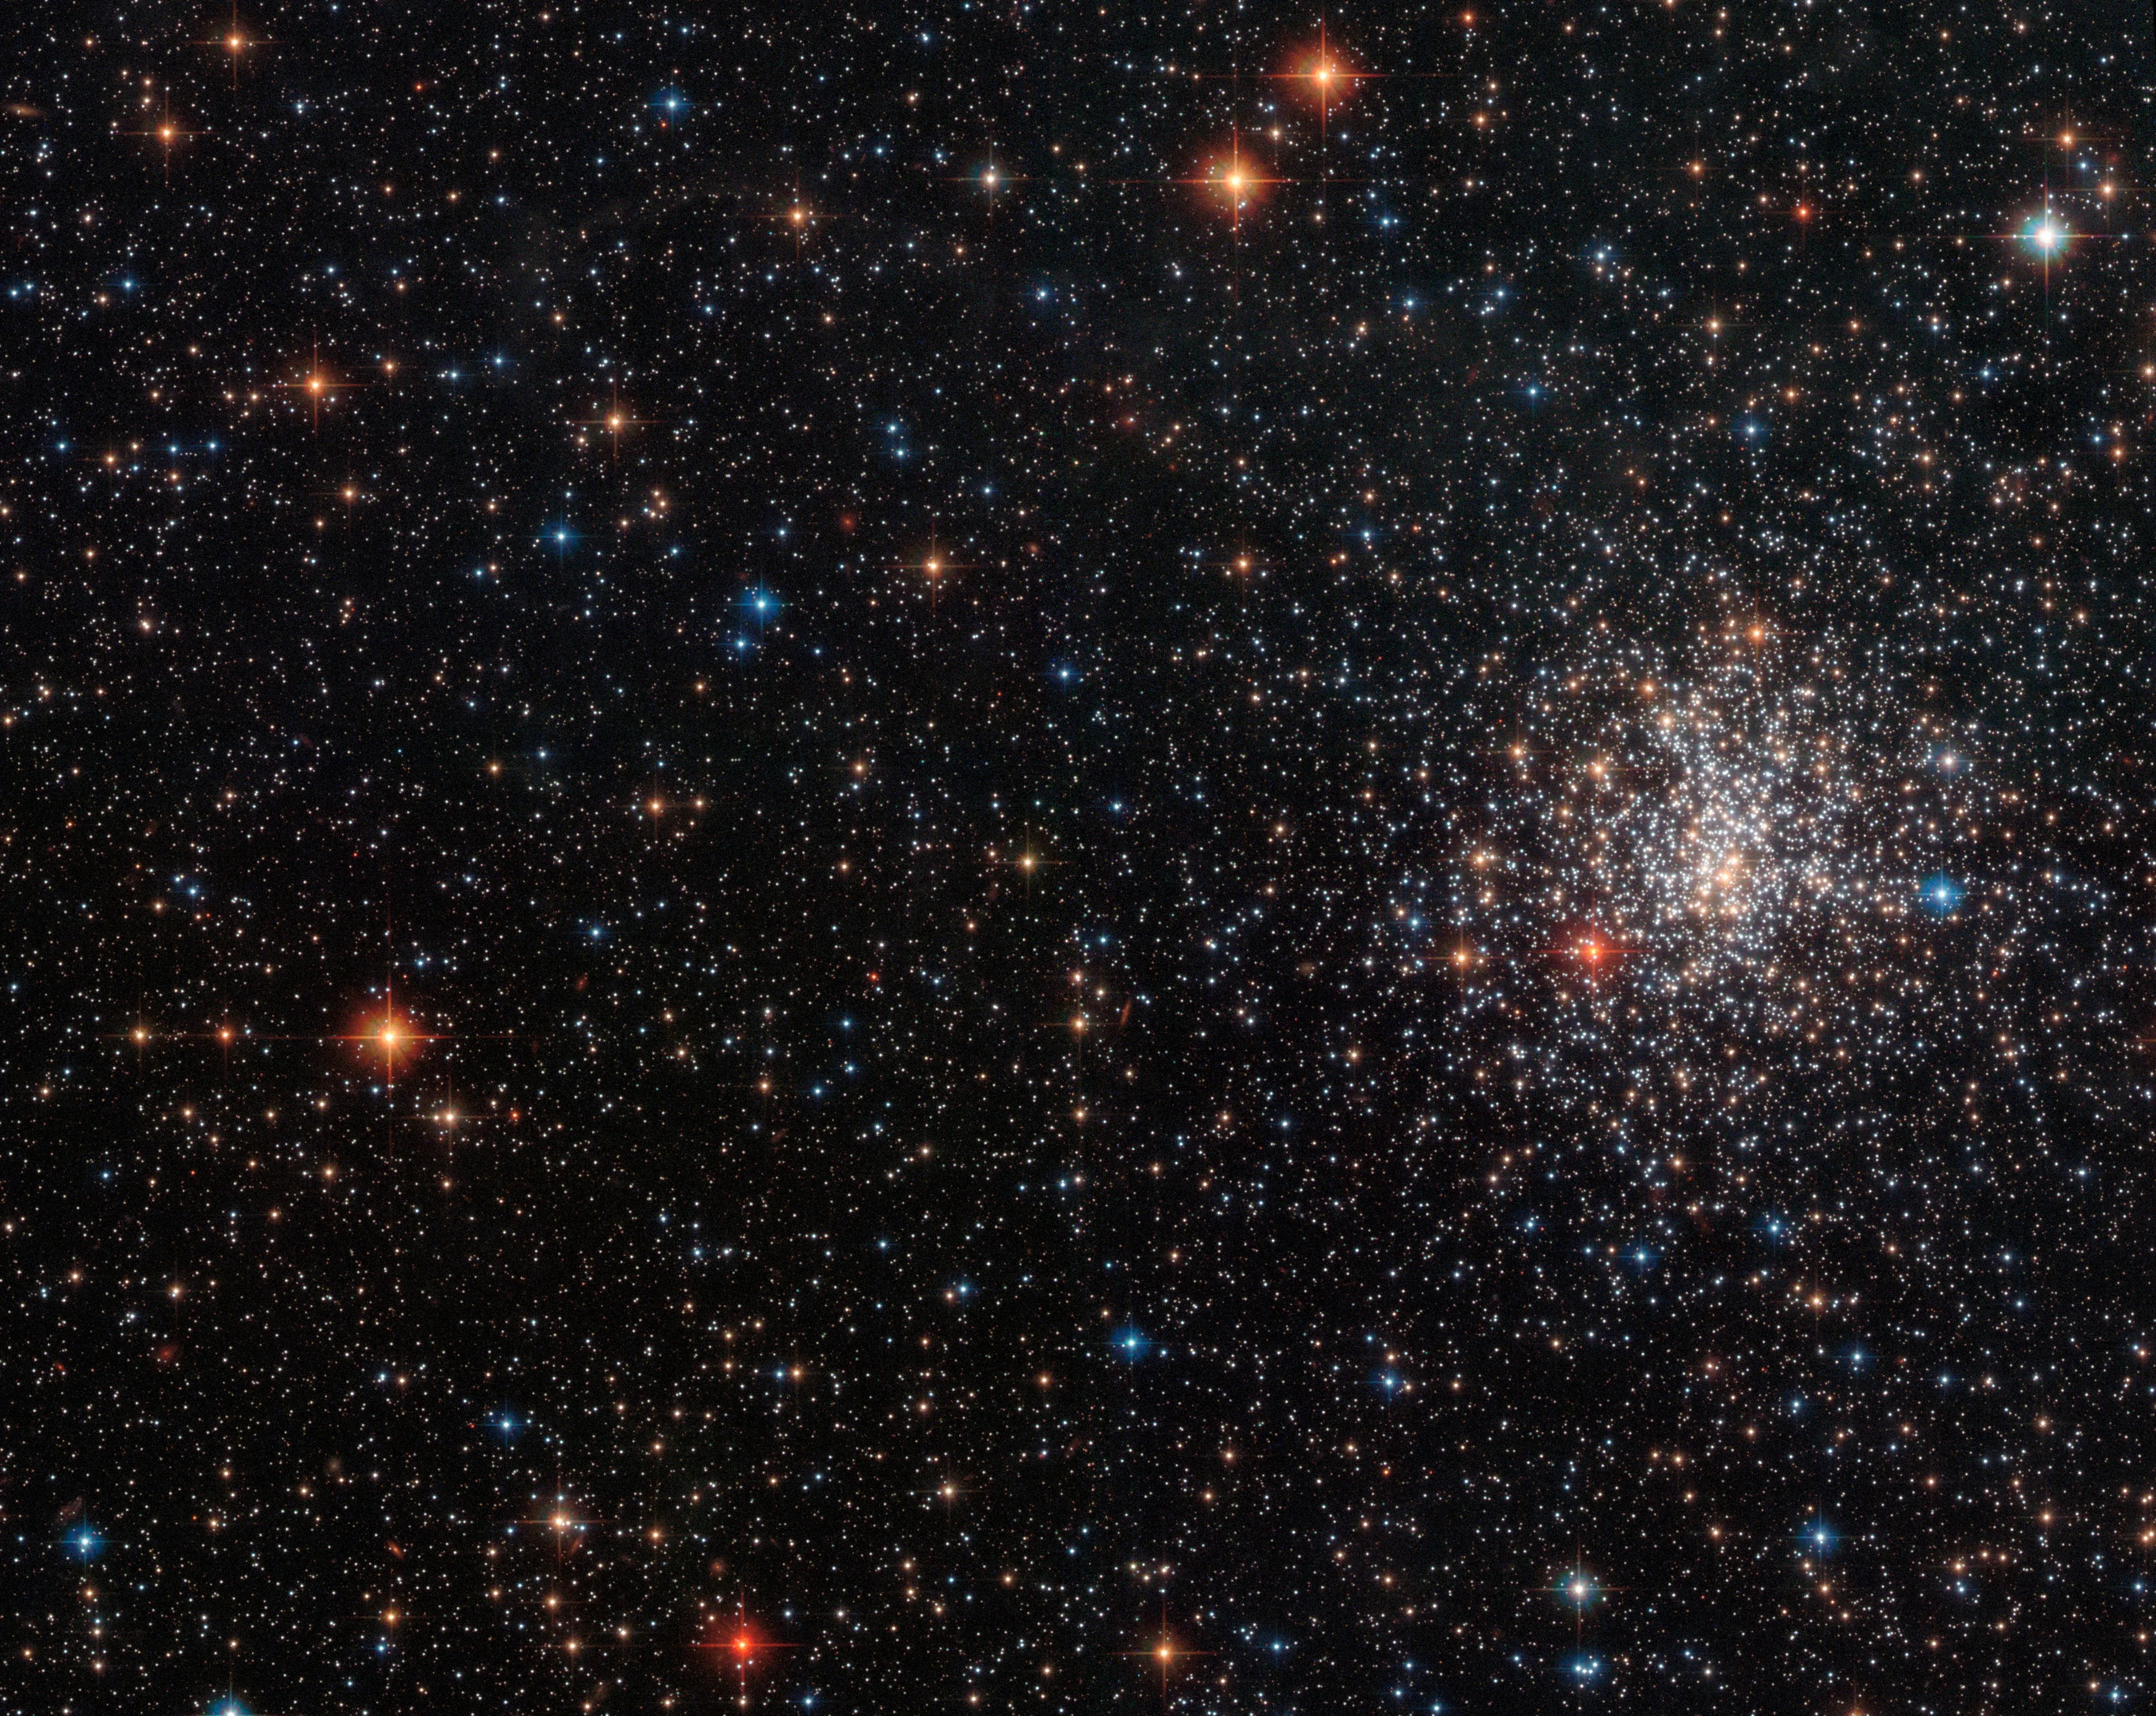 A bright cluster of stars to the right, with bright red and blue standouts